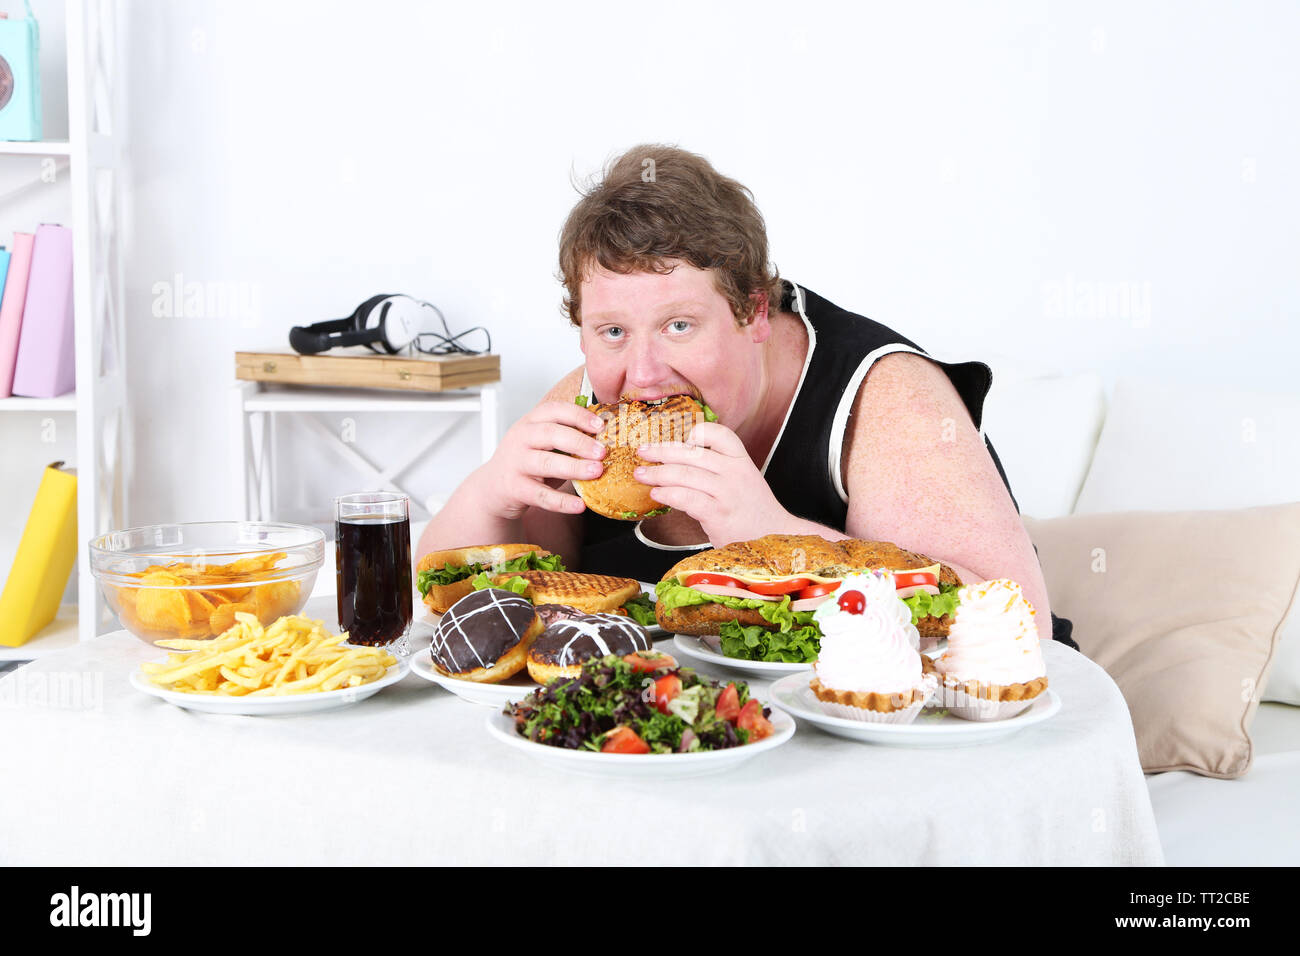 High Quality Fat man eating a lot of unhealthy food, on home interior backgro Blank Meme Template